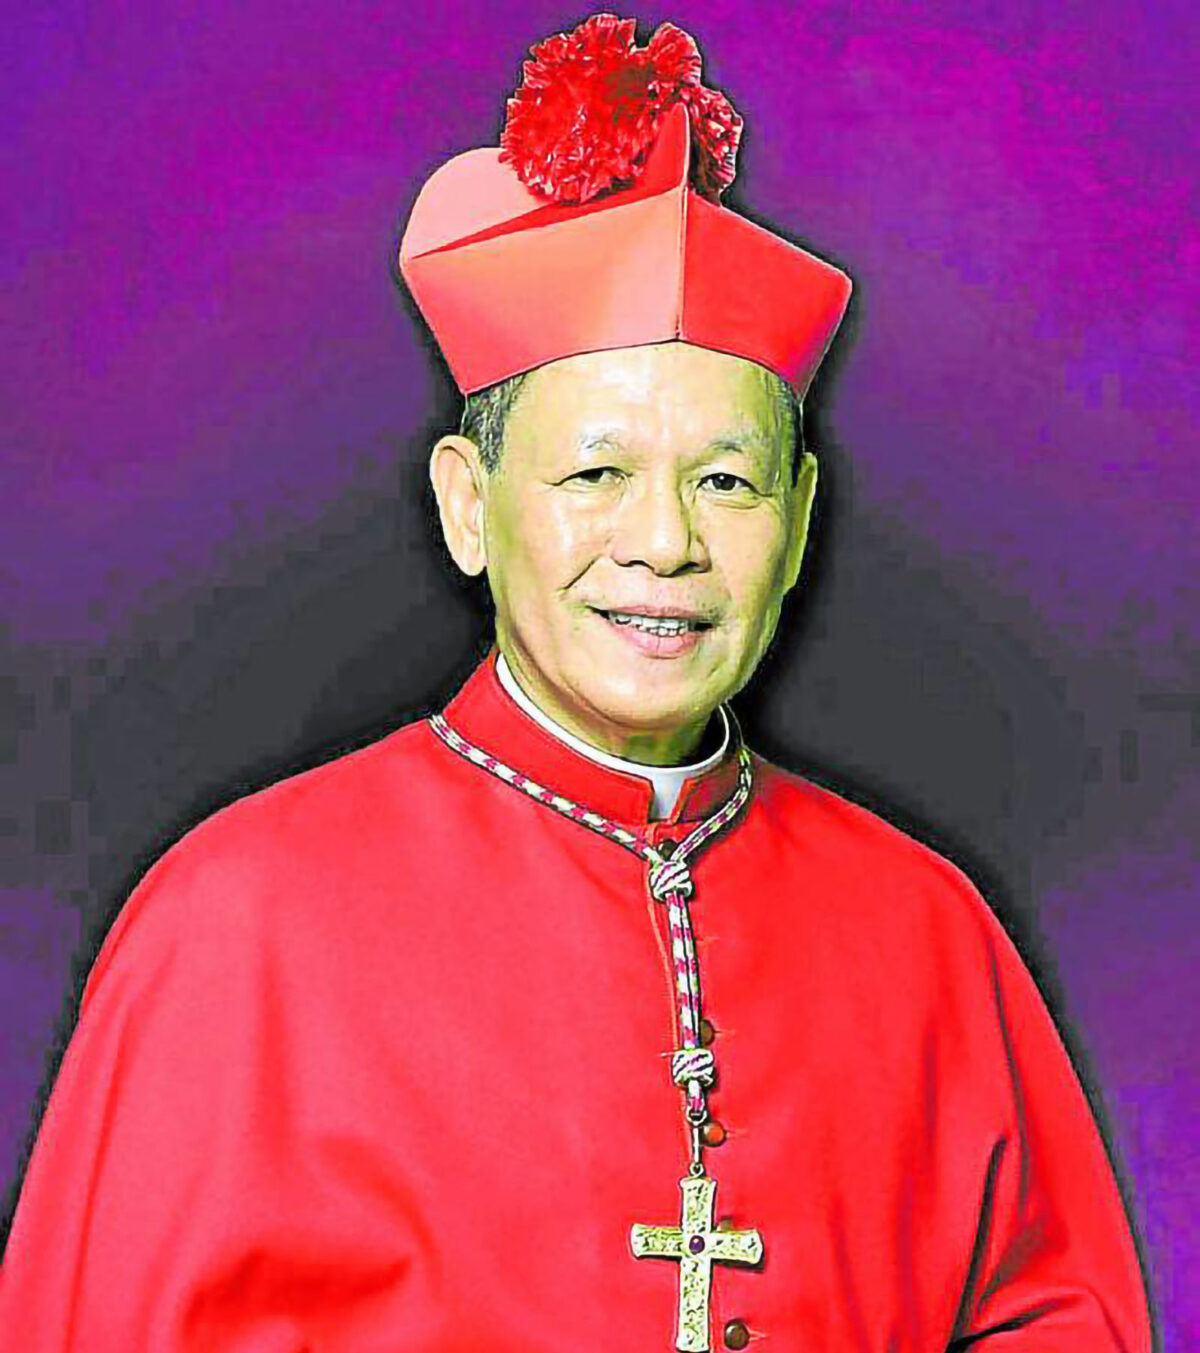 Manila priest suspended, gets into row with bishop